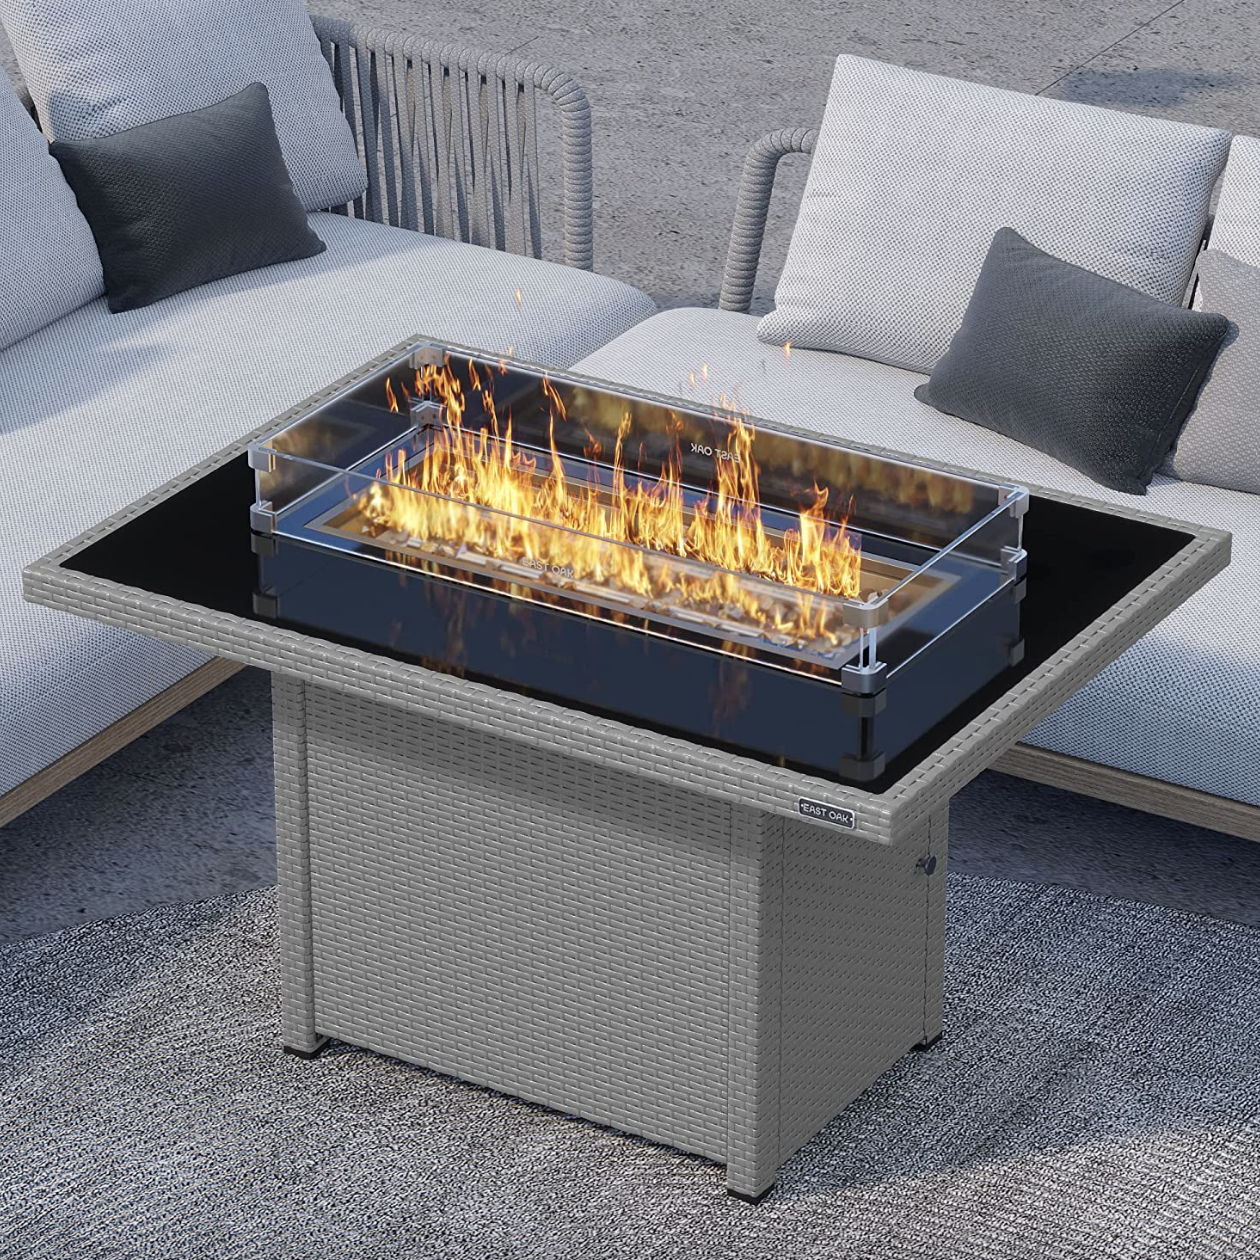 The gray firepit with a glass top and fire on top